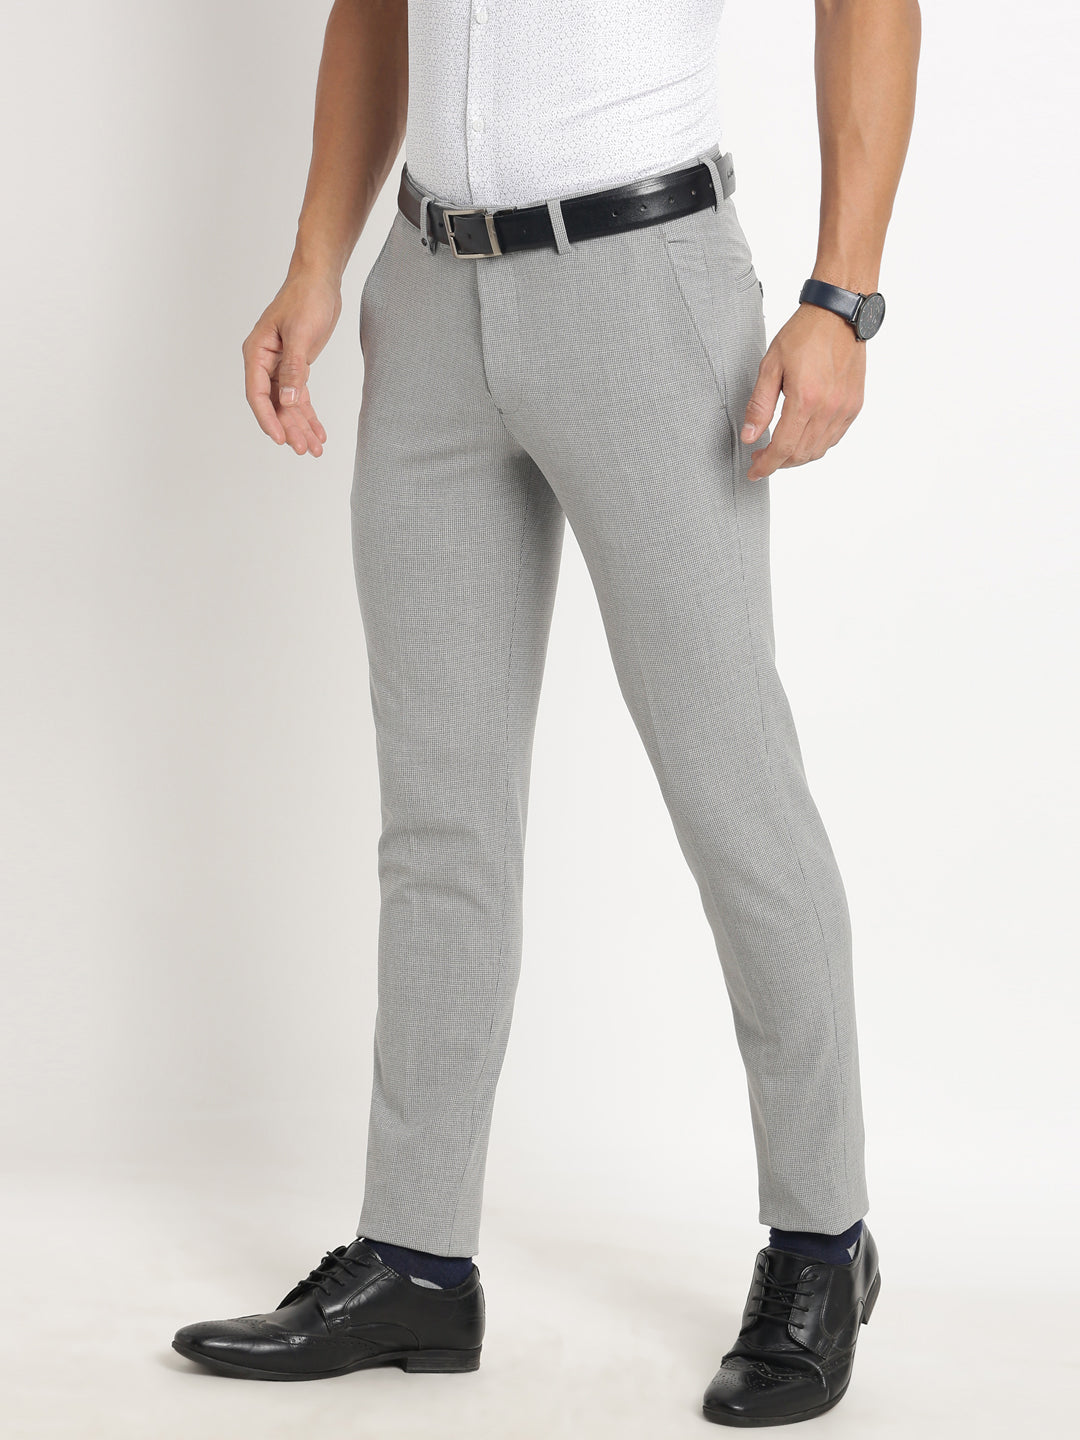 Express Extra Slim Grey Cotton Stretch Suit Pants Gray Men's W30 L30 |  CoolSprings Galleria